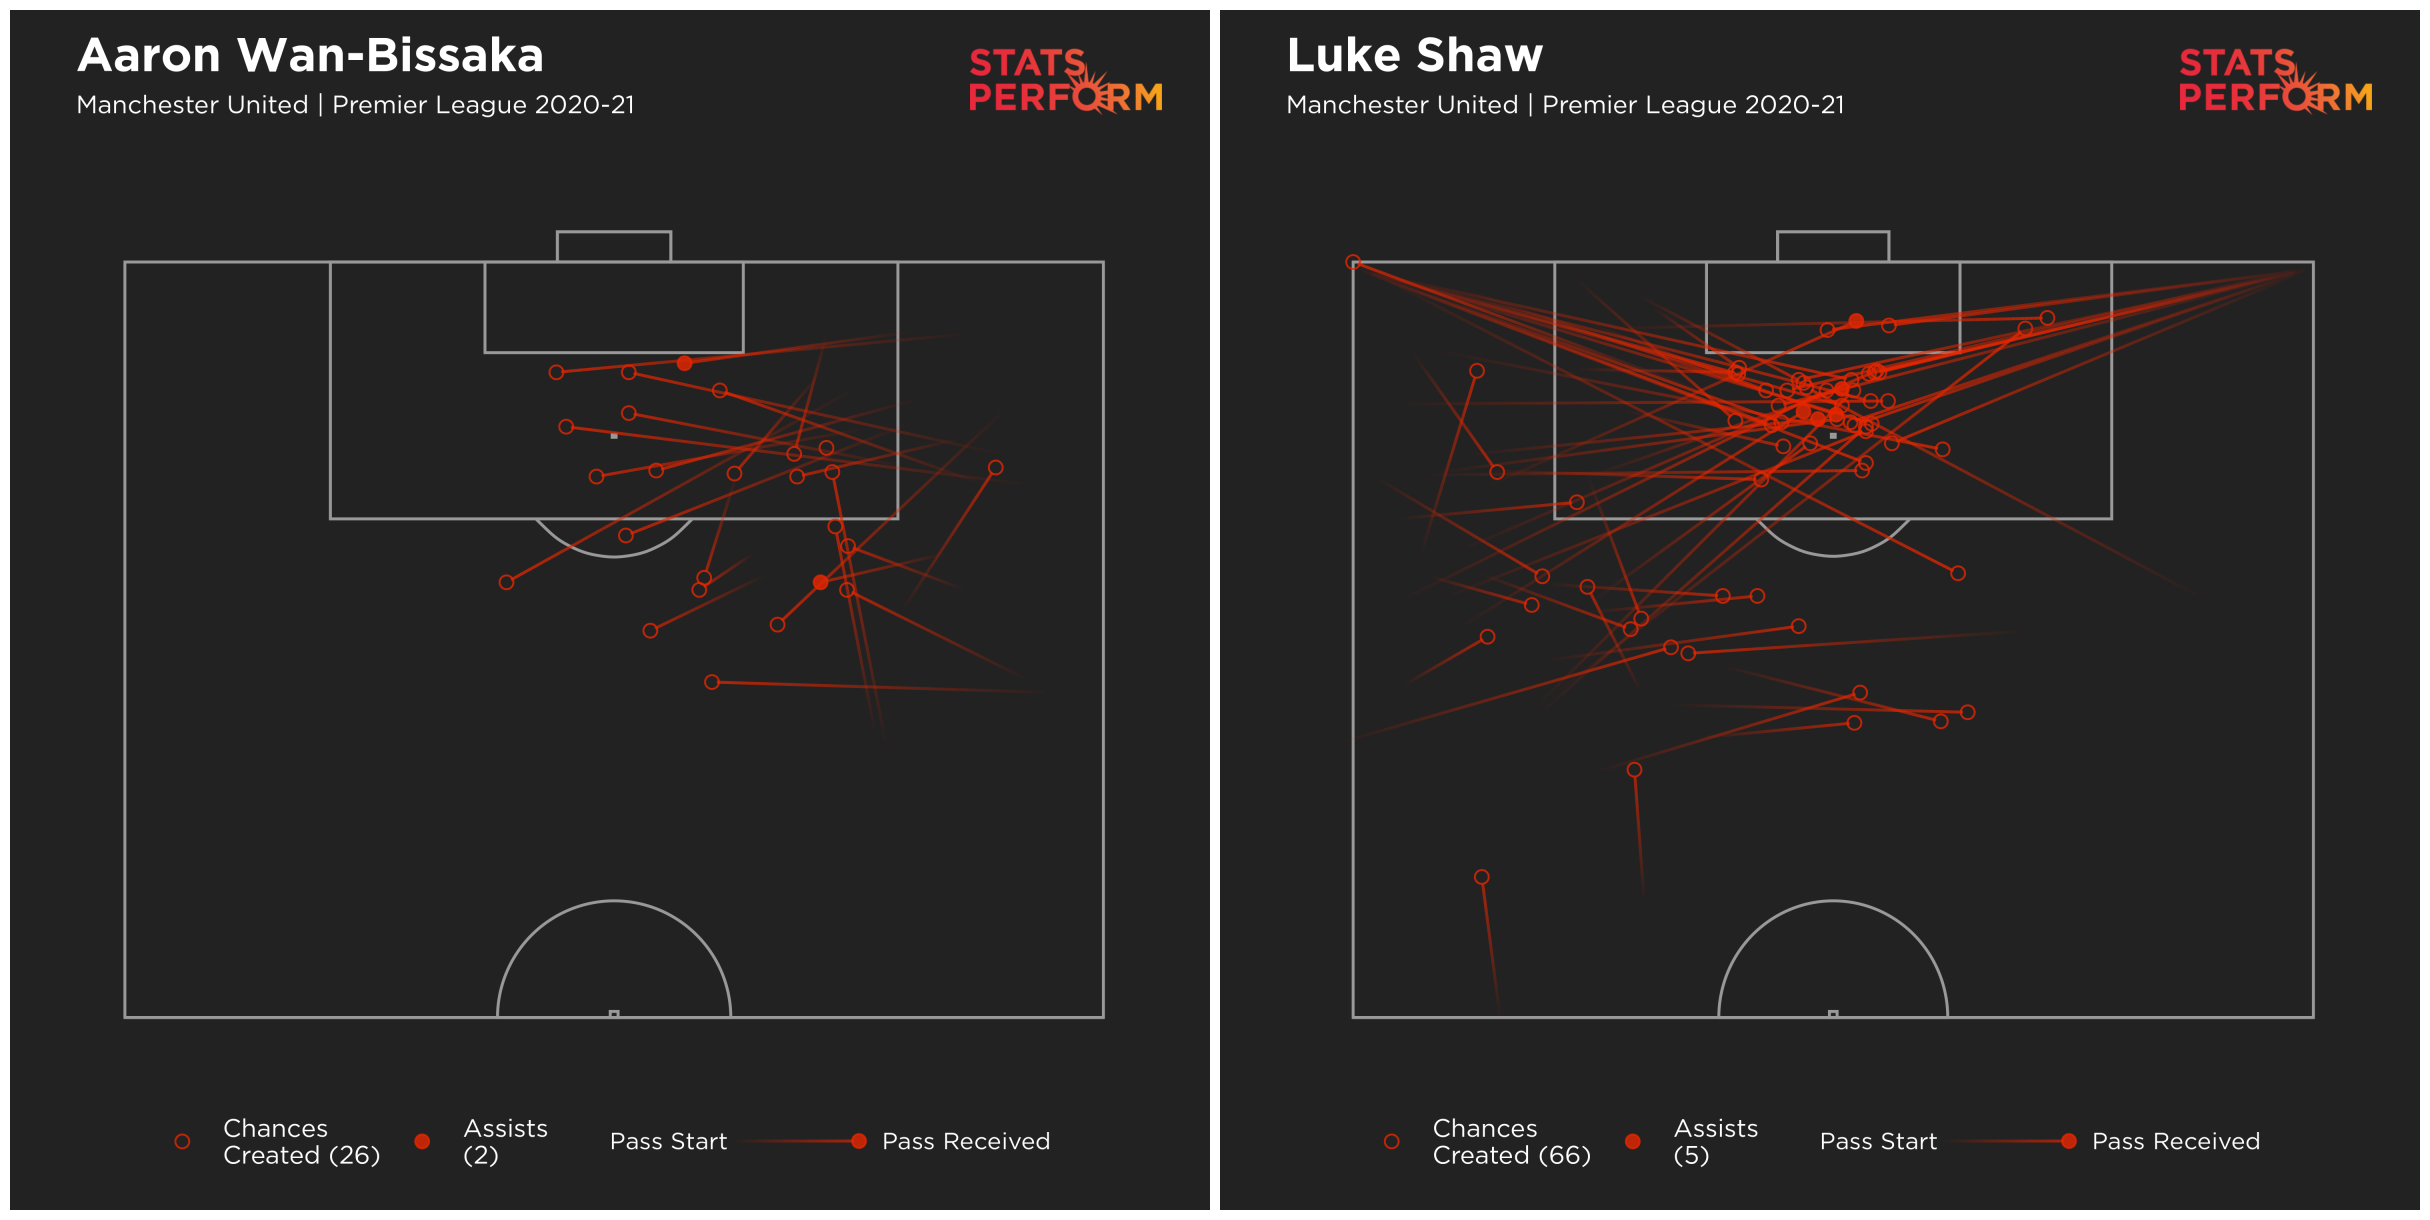 Shaw is proving a far more reliable source of chances than Wan-Bissaka